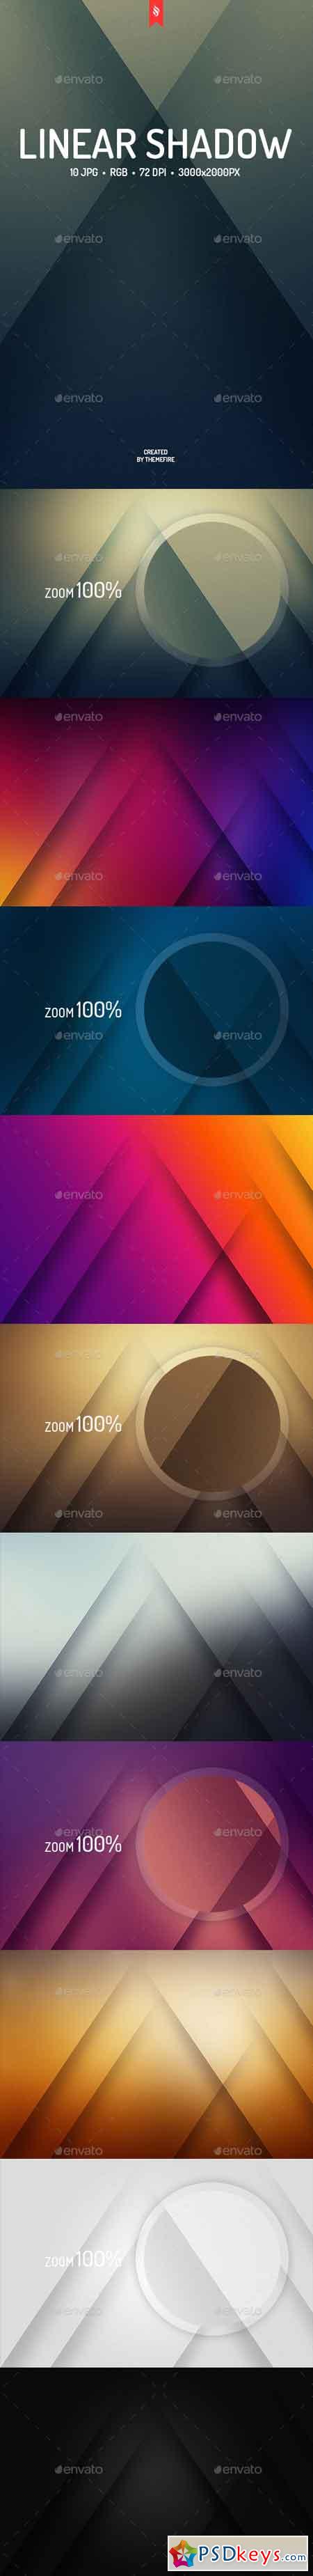 Linear Shadow Abstract Backgrounds 14409132